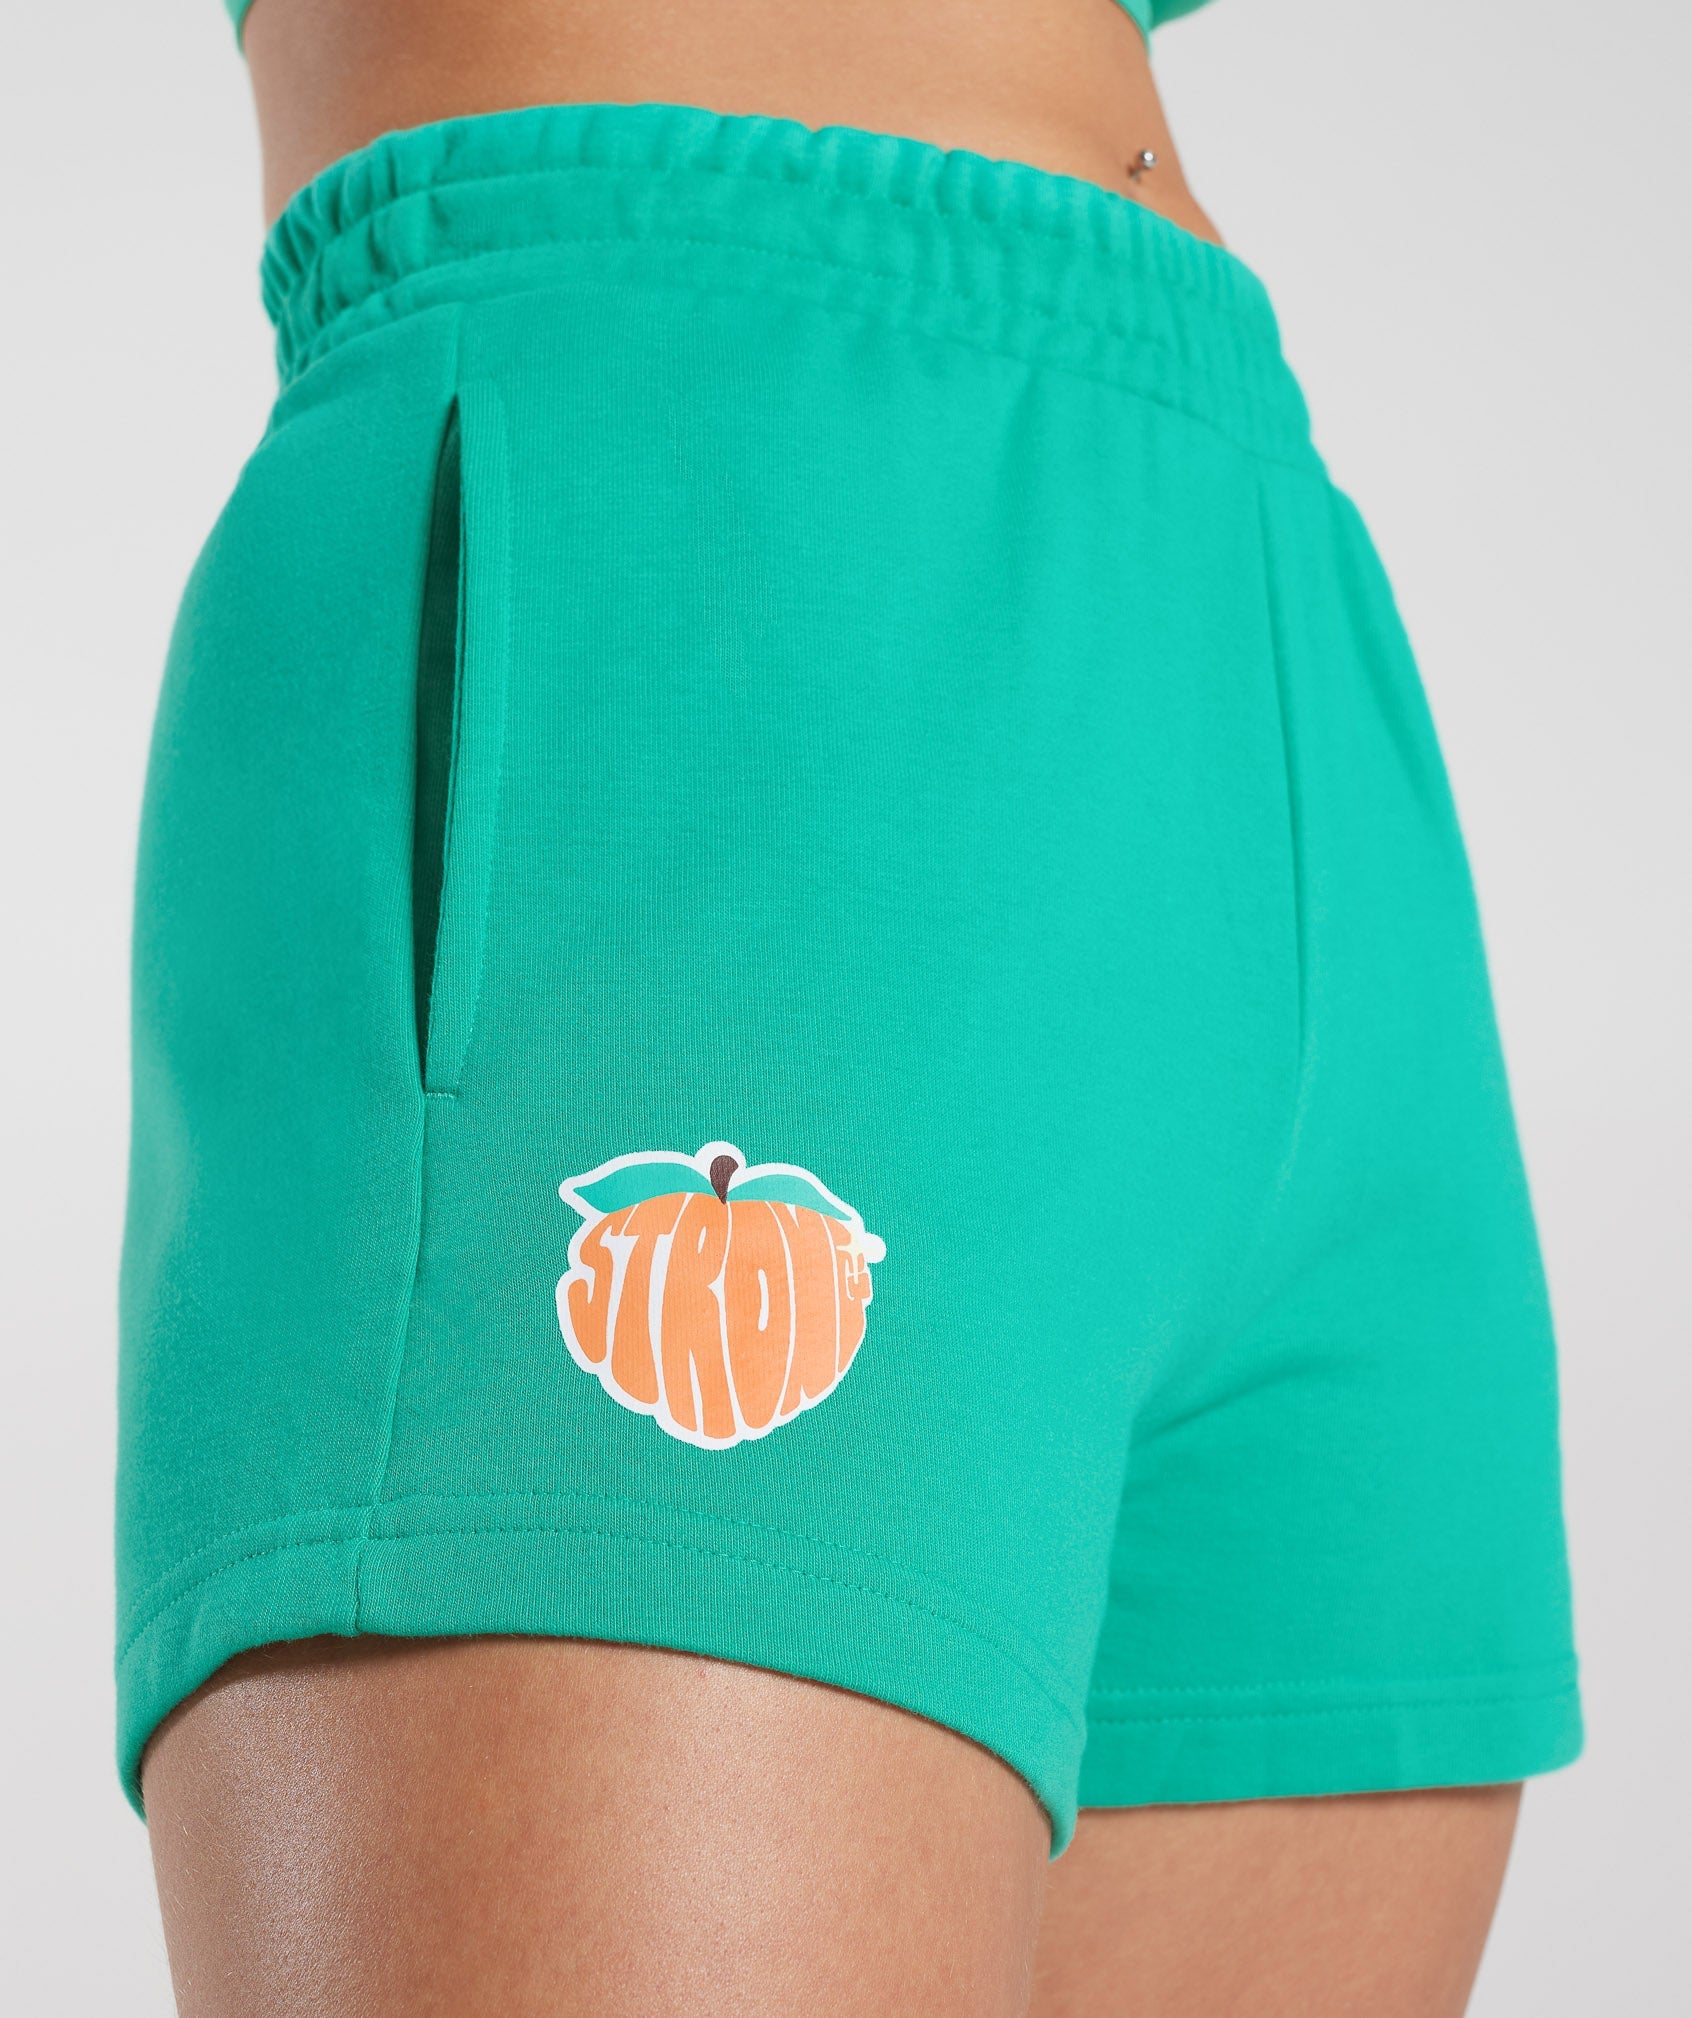 Strong Peach Shorts in Bright Green - view 5